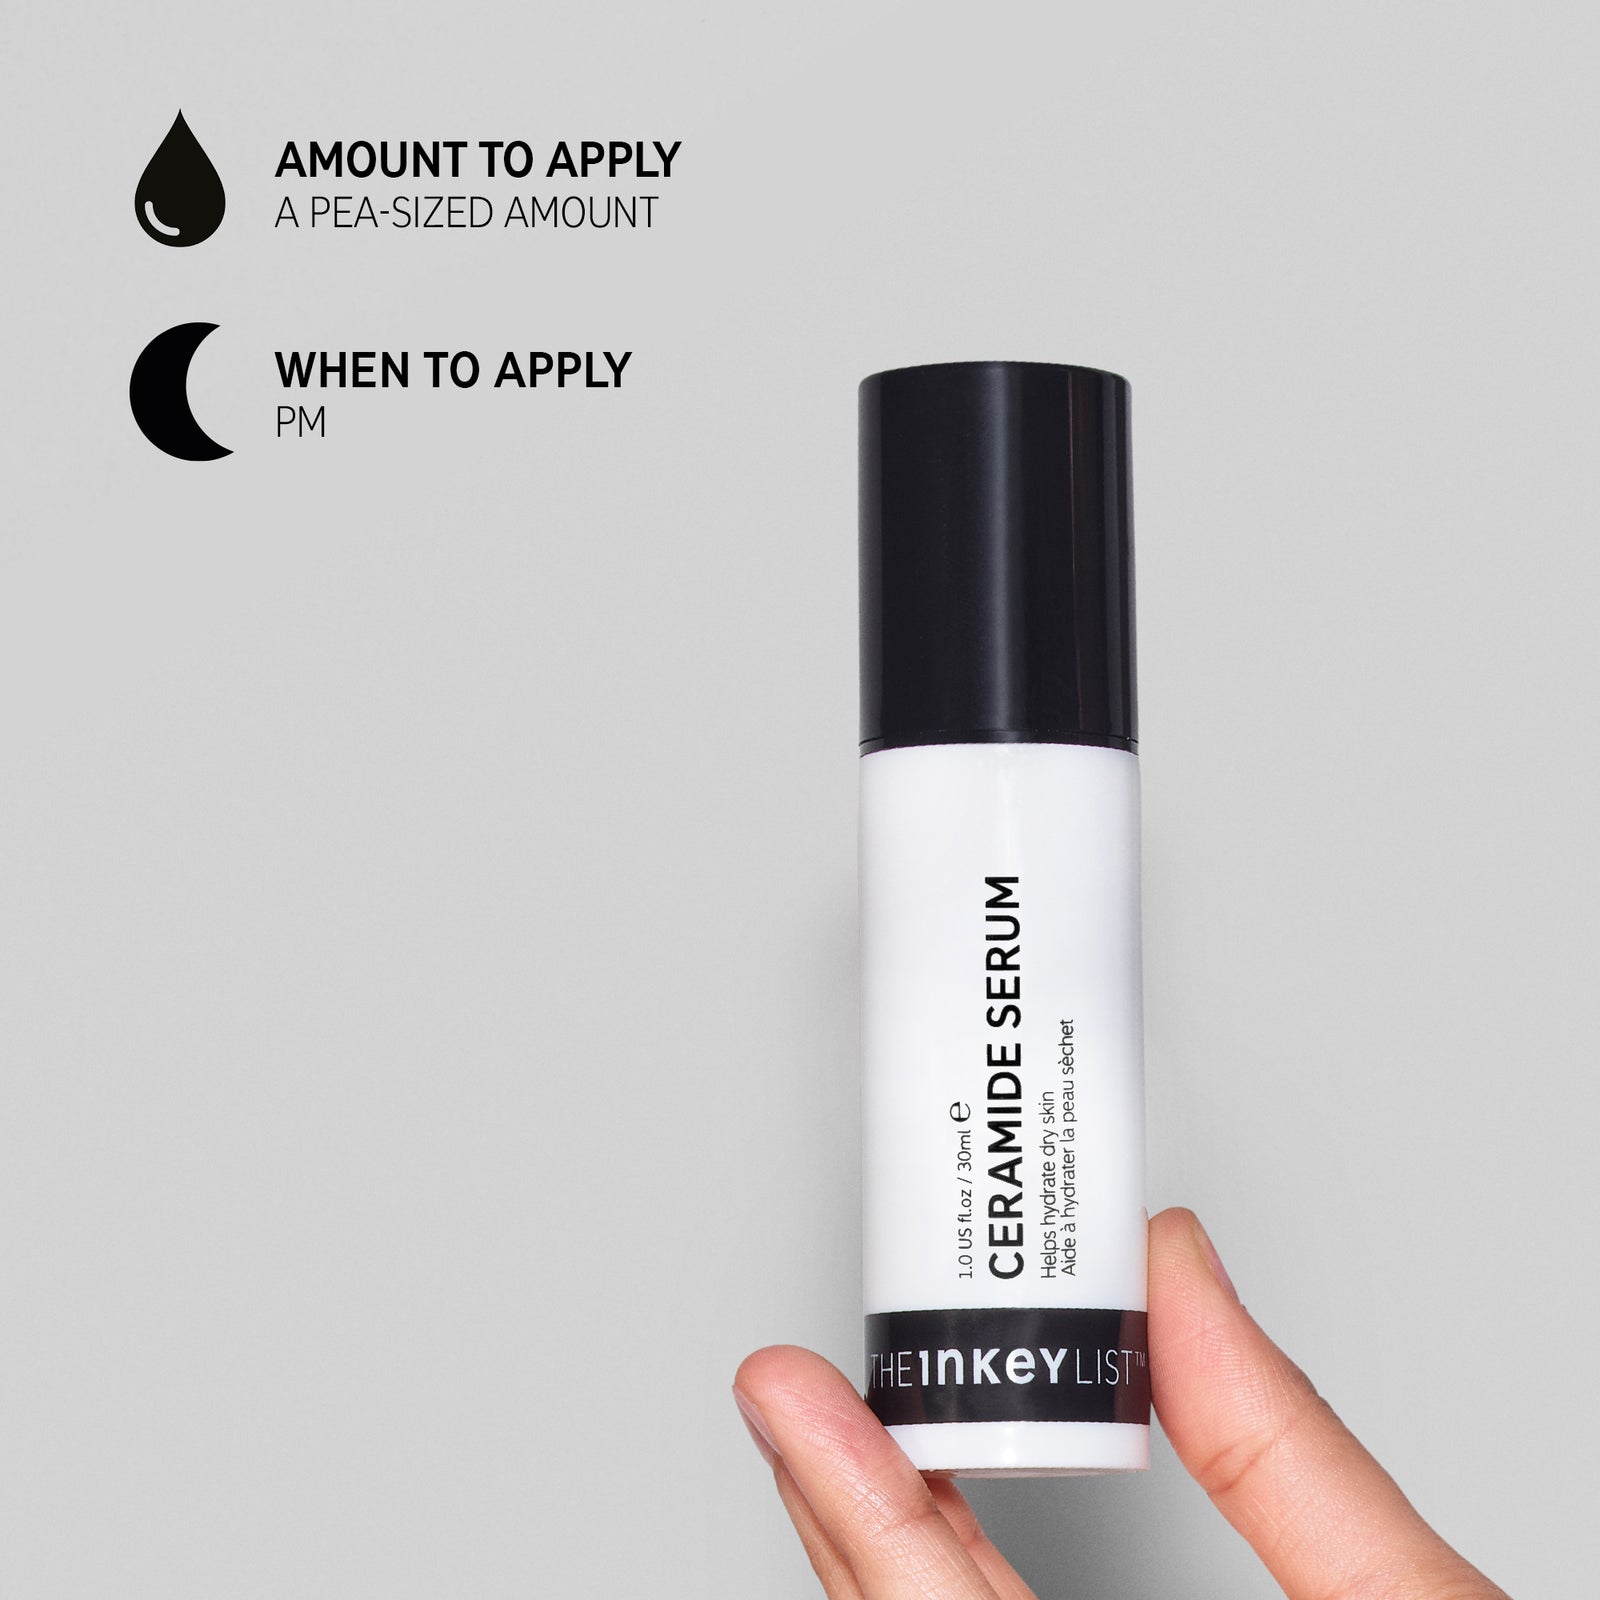 Ceramide Treatment bottle against a grey background with directions of amount to apply (pea-sized amount) and when to apply product (PM) as part of your skincare routine